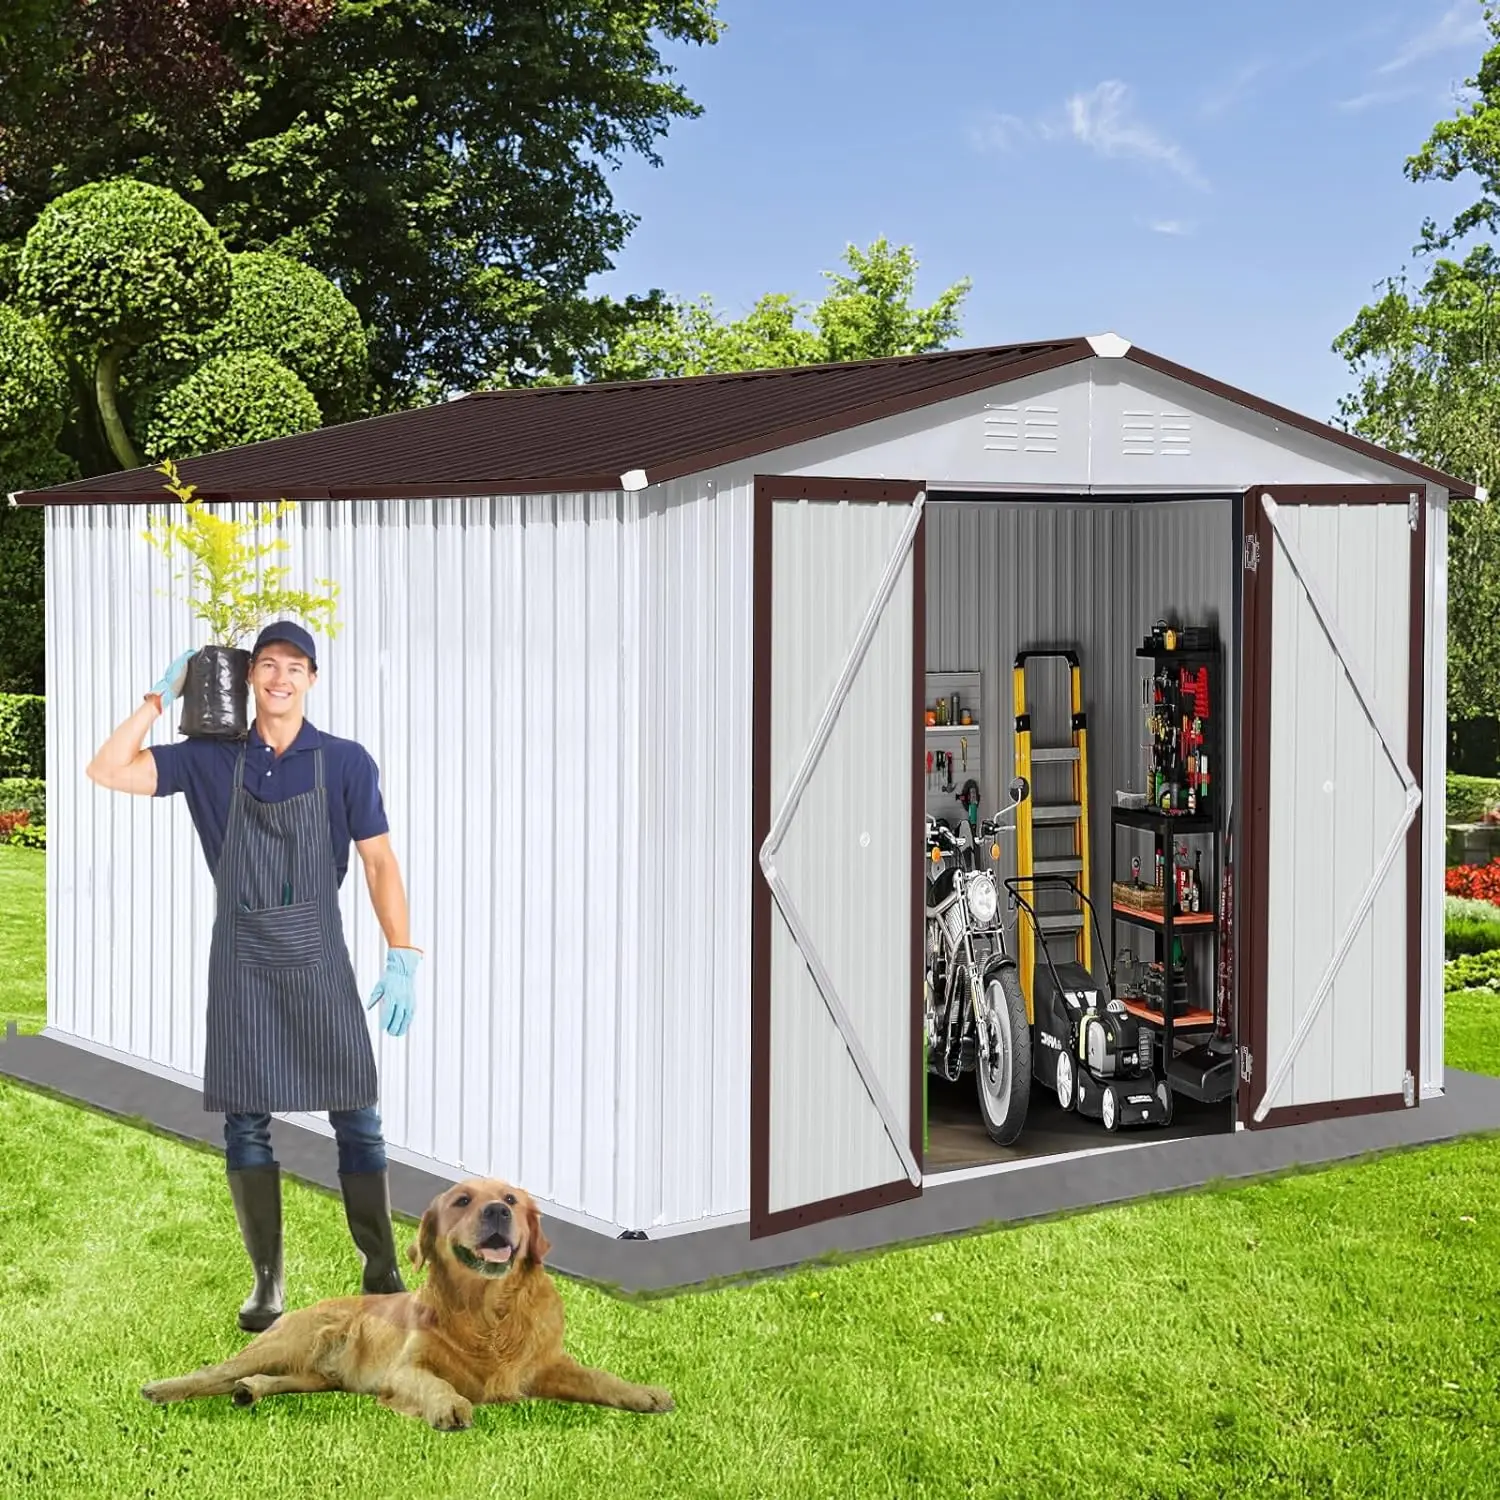 

Padlock Storage Shed Outdoor Garden Shelter 8 X 10 Ft Storage Shed Outdoor Backyard Garden Tool Shed With Hinged Door Lawn Sheds